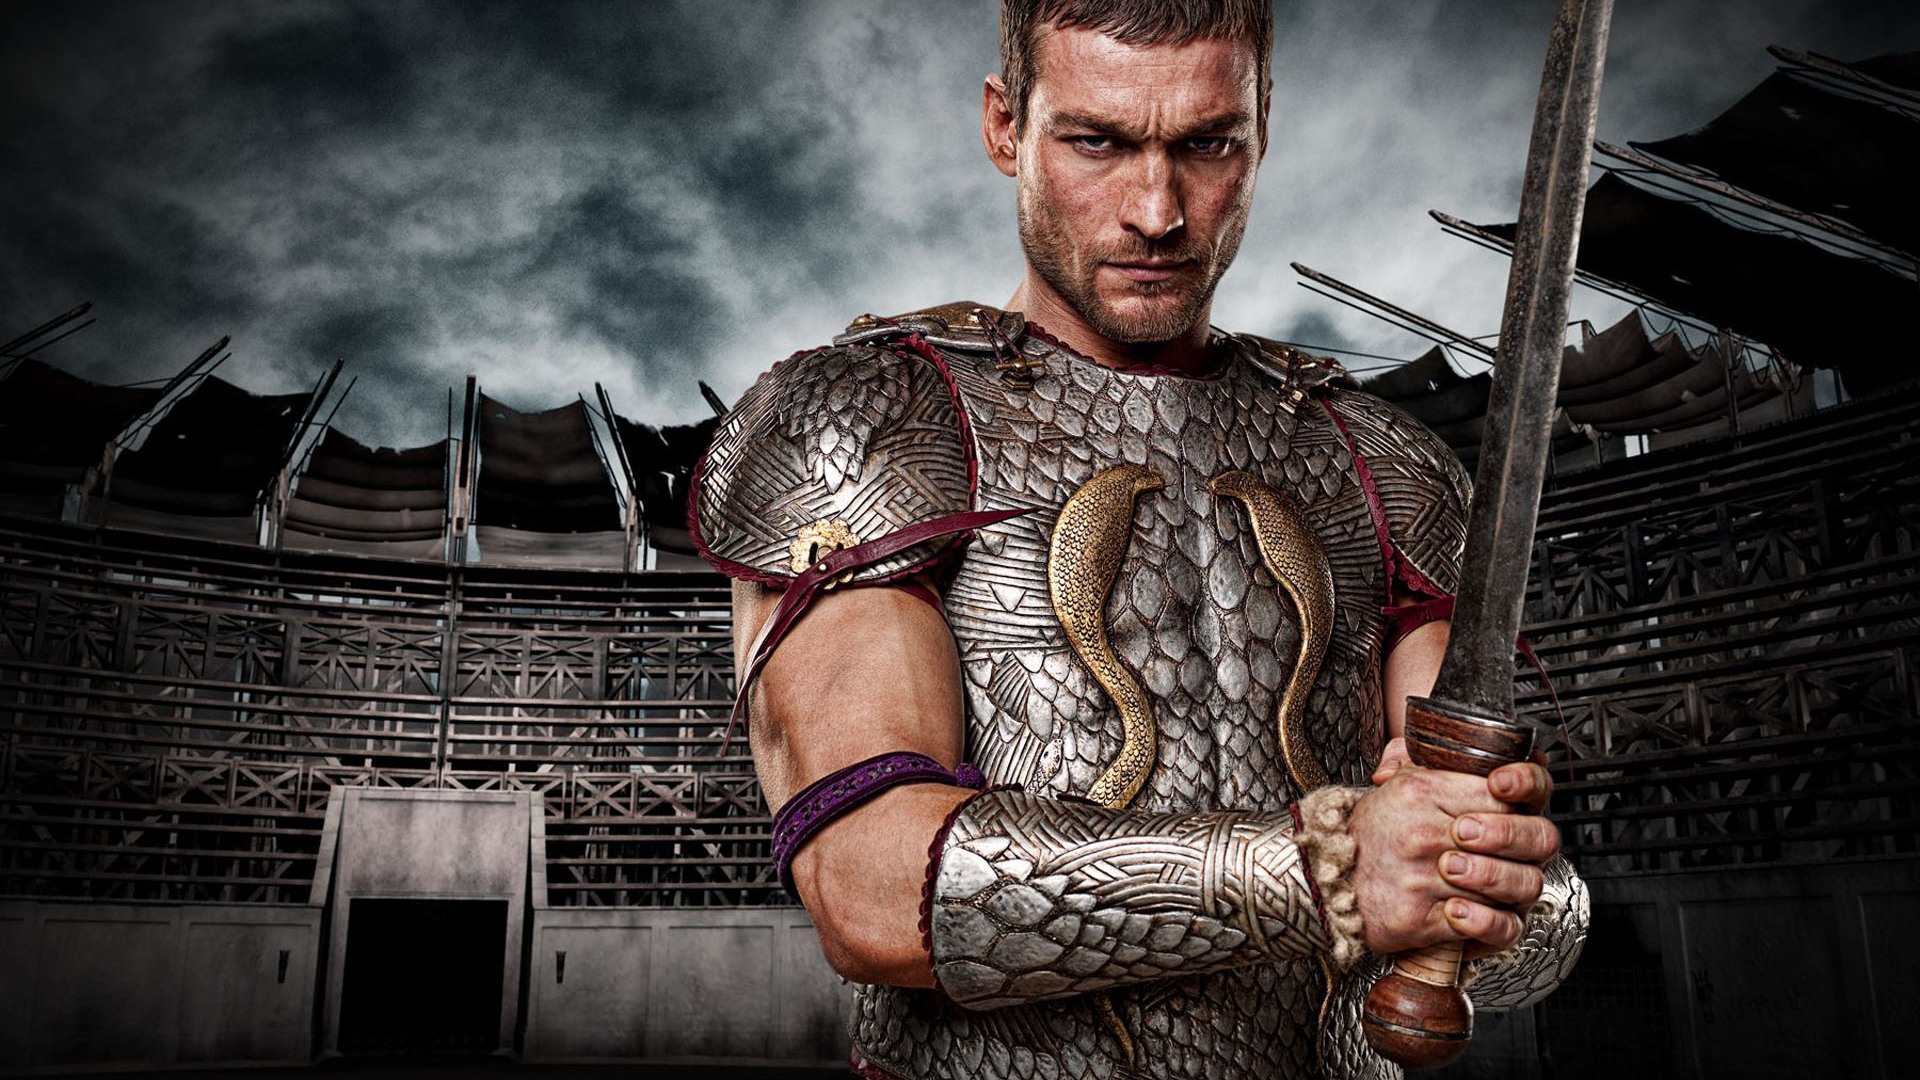 Spartacus: Blood and Sand HD Wallpaper #3 - 1920x1080